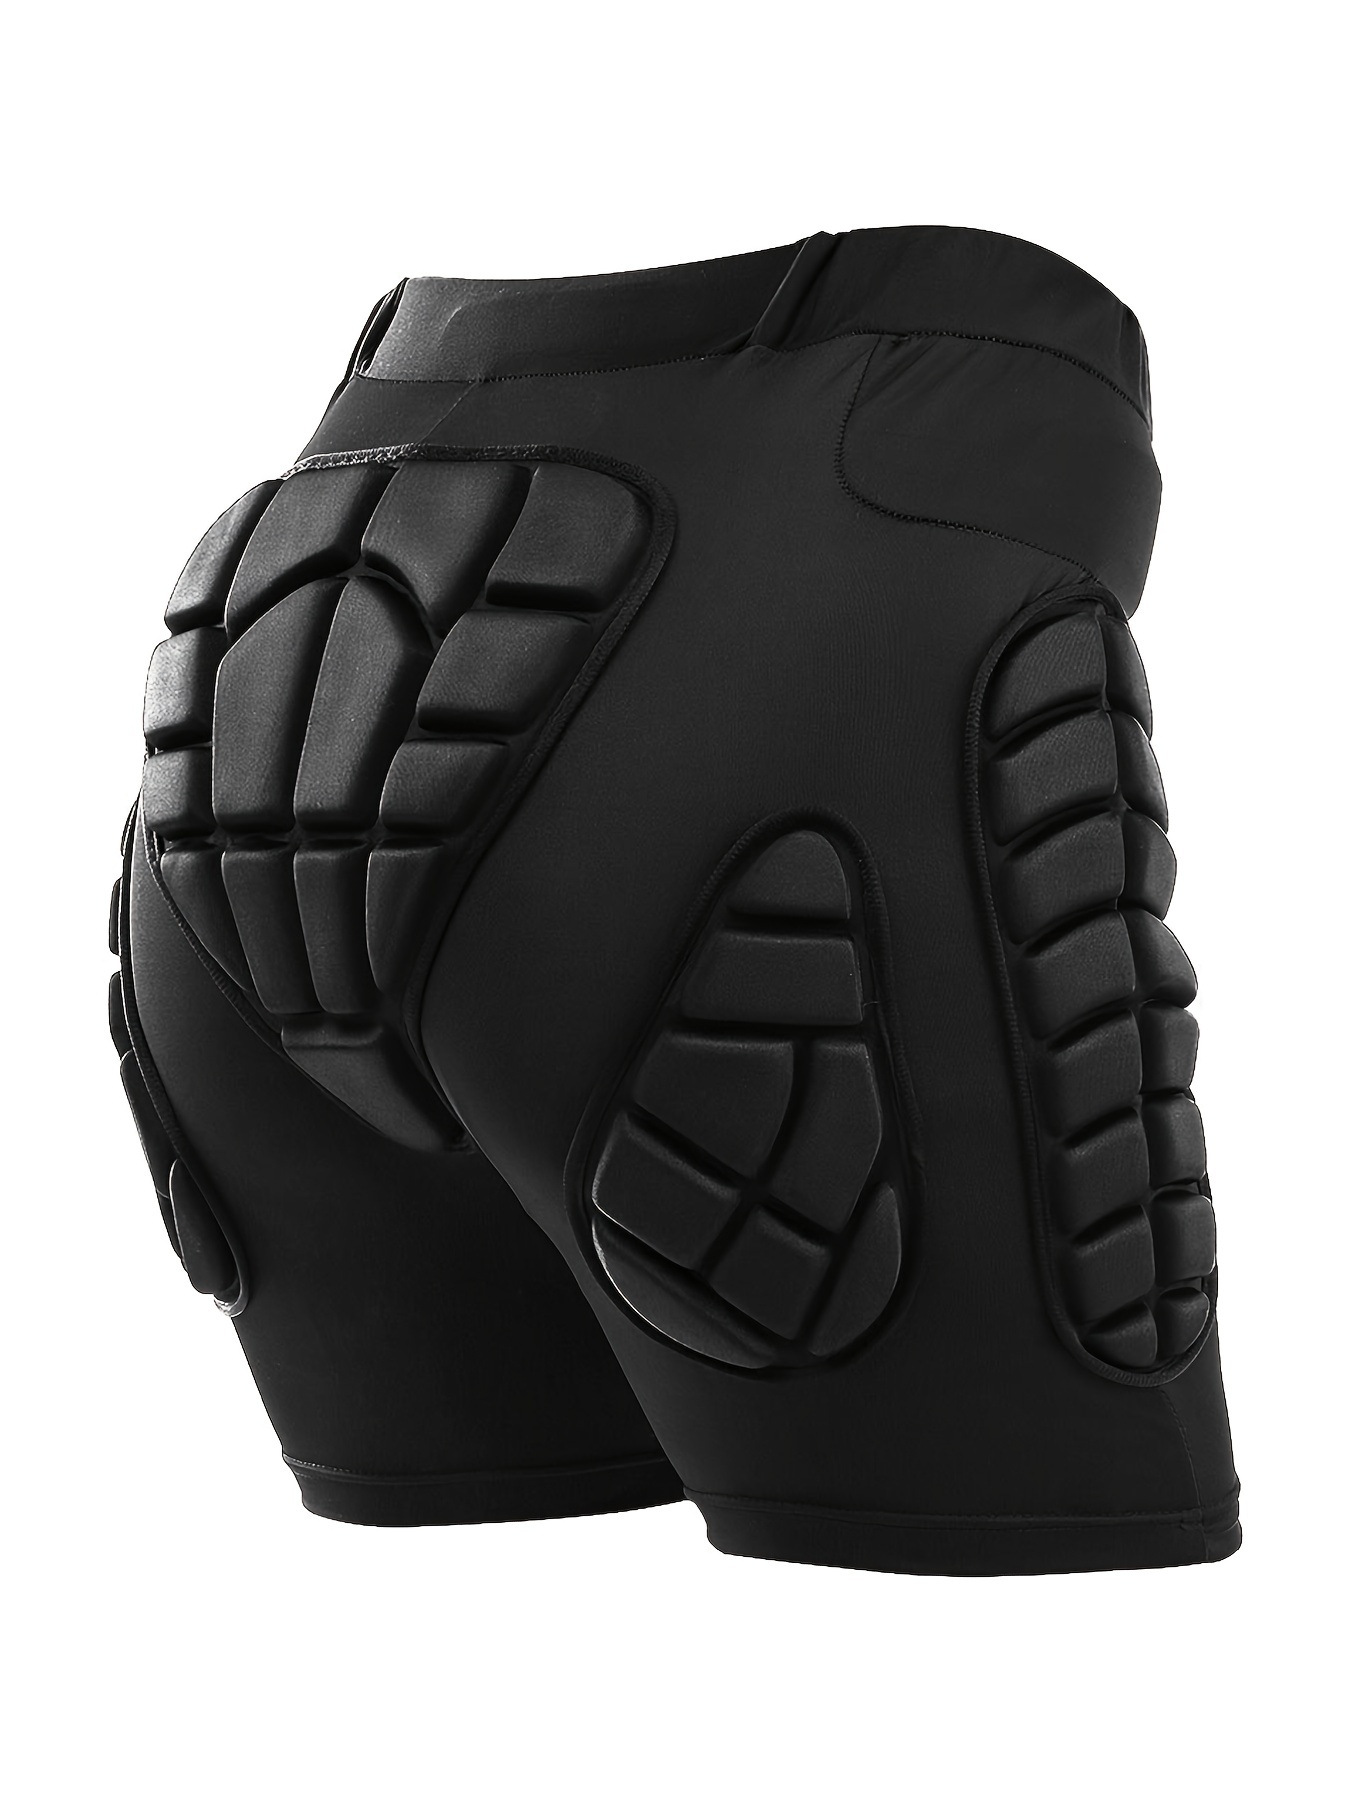 Breathable 3d Protection Gear For Hip Butt And Tailbone Protective